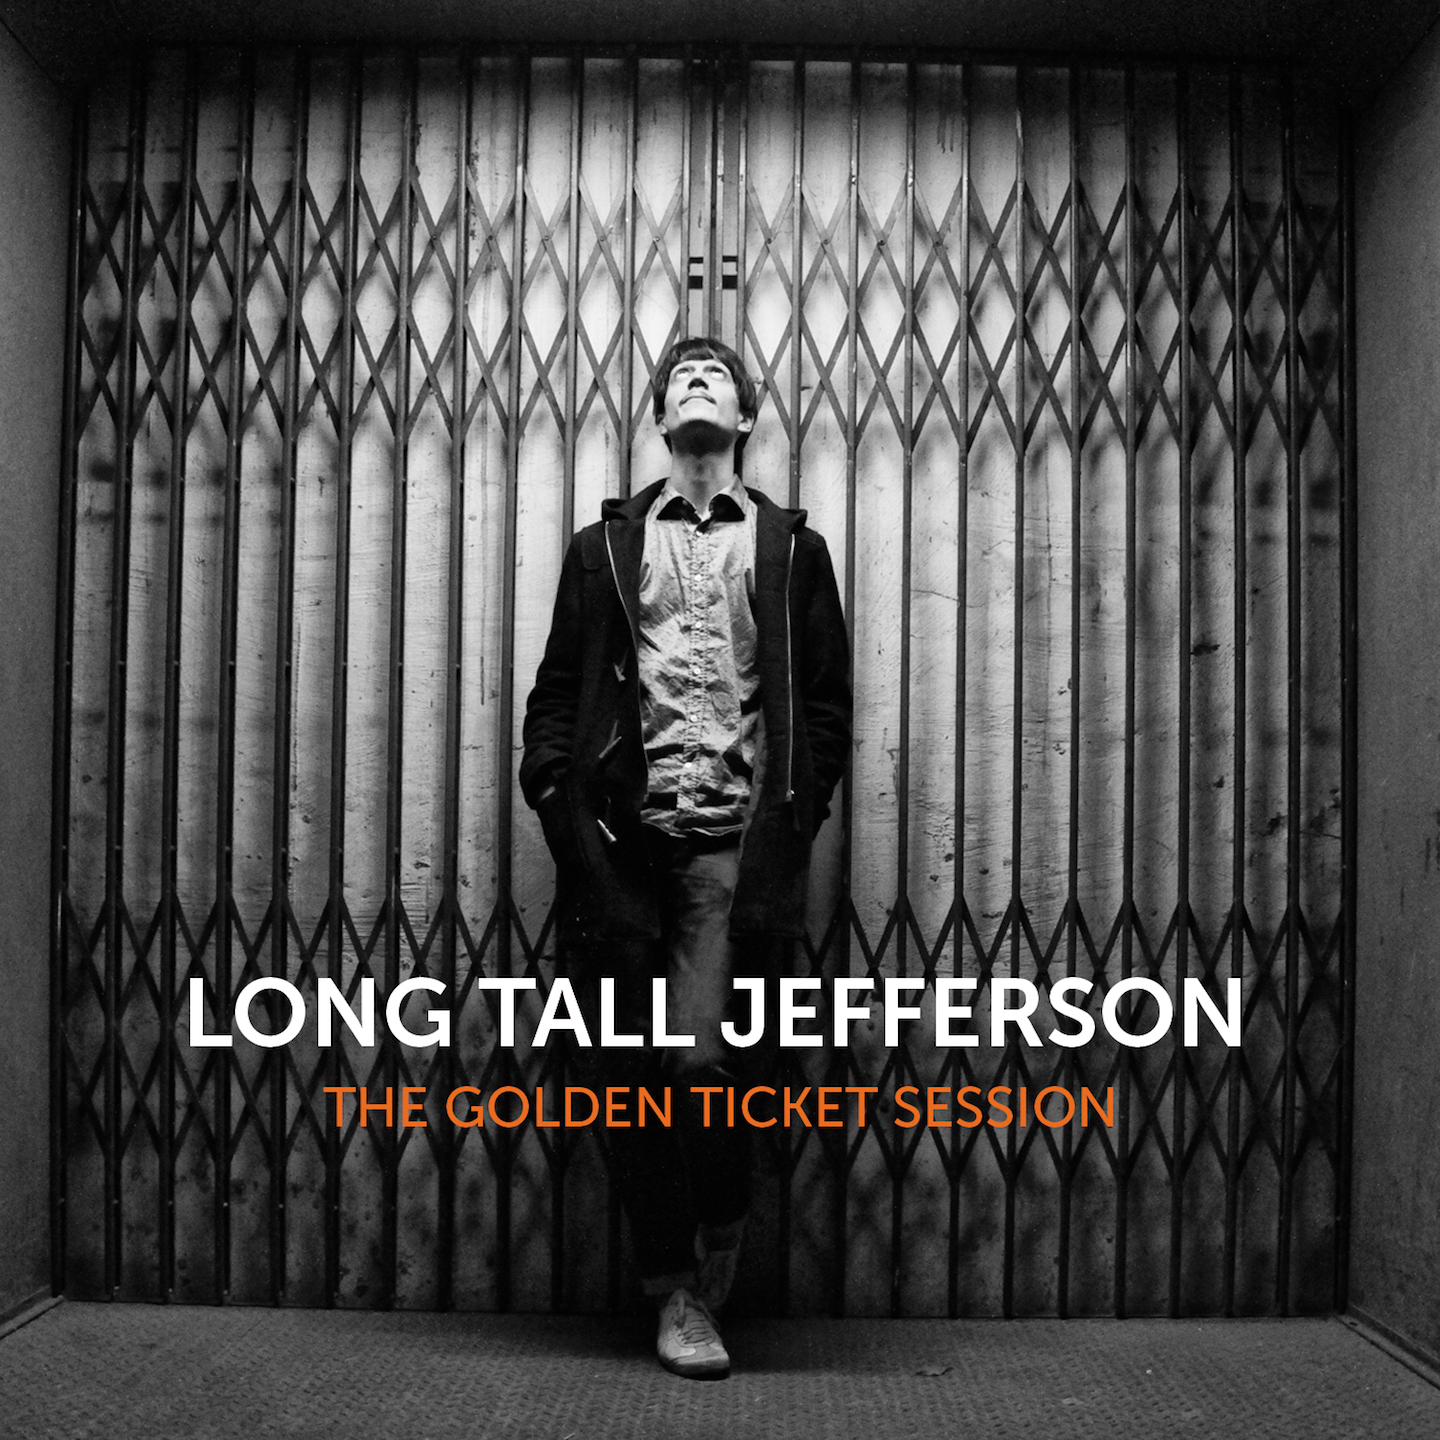 Long Tall Jefferson – The Golden Ticket Session